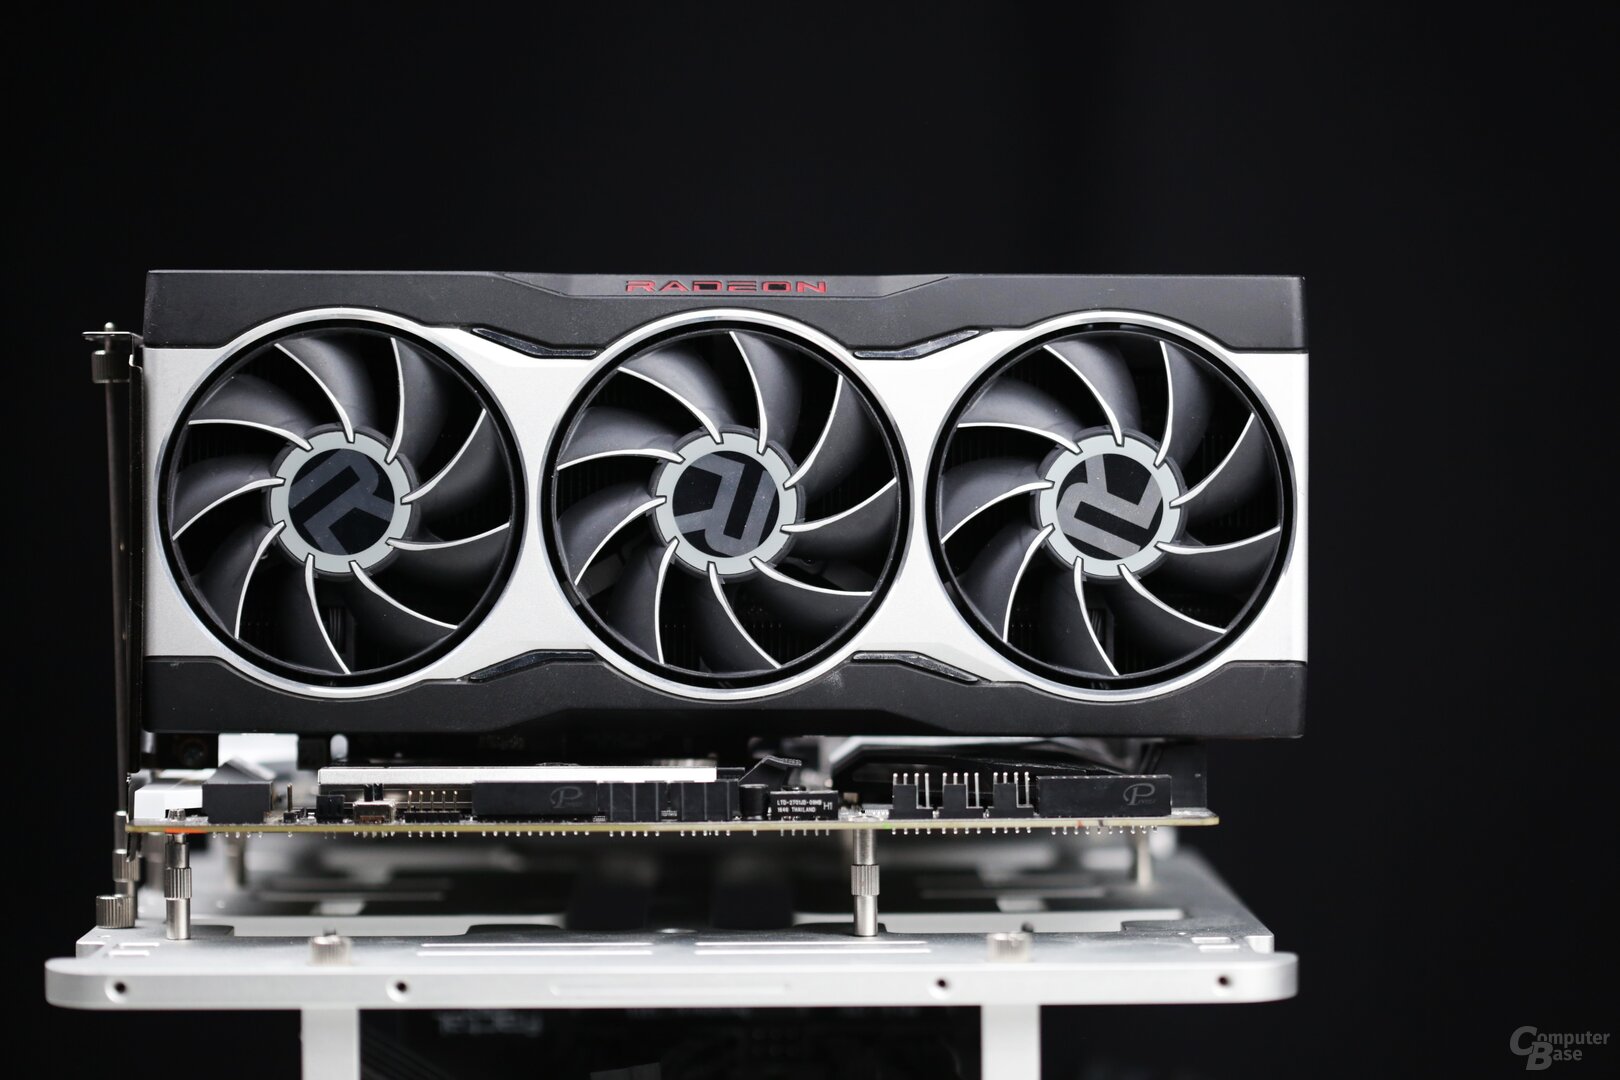 The AMD Radeon RX 6900 XT in the reference design